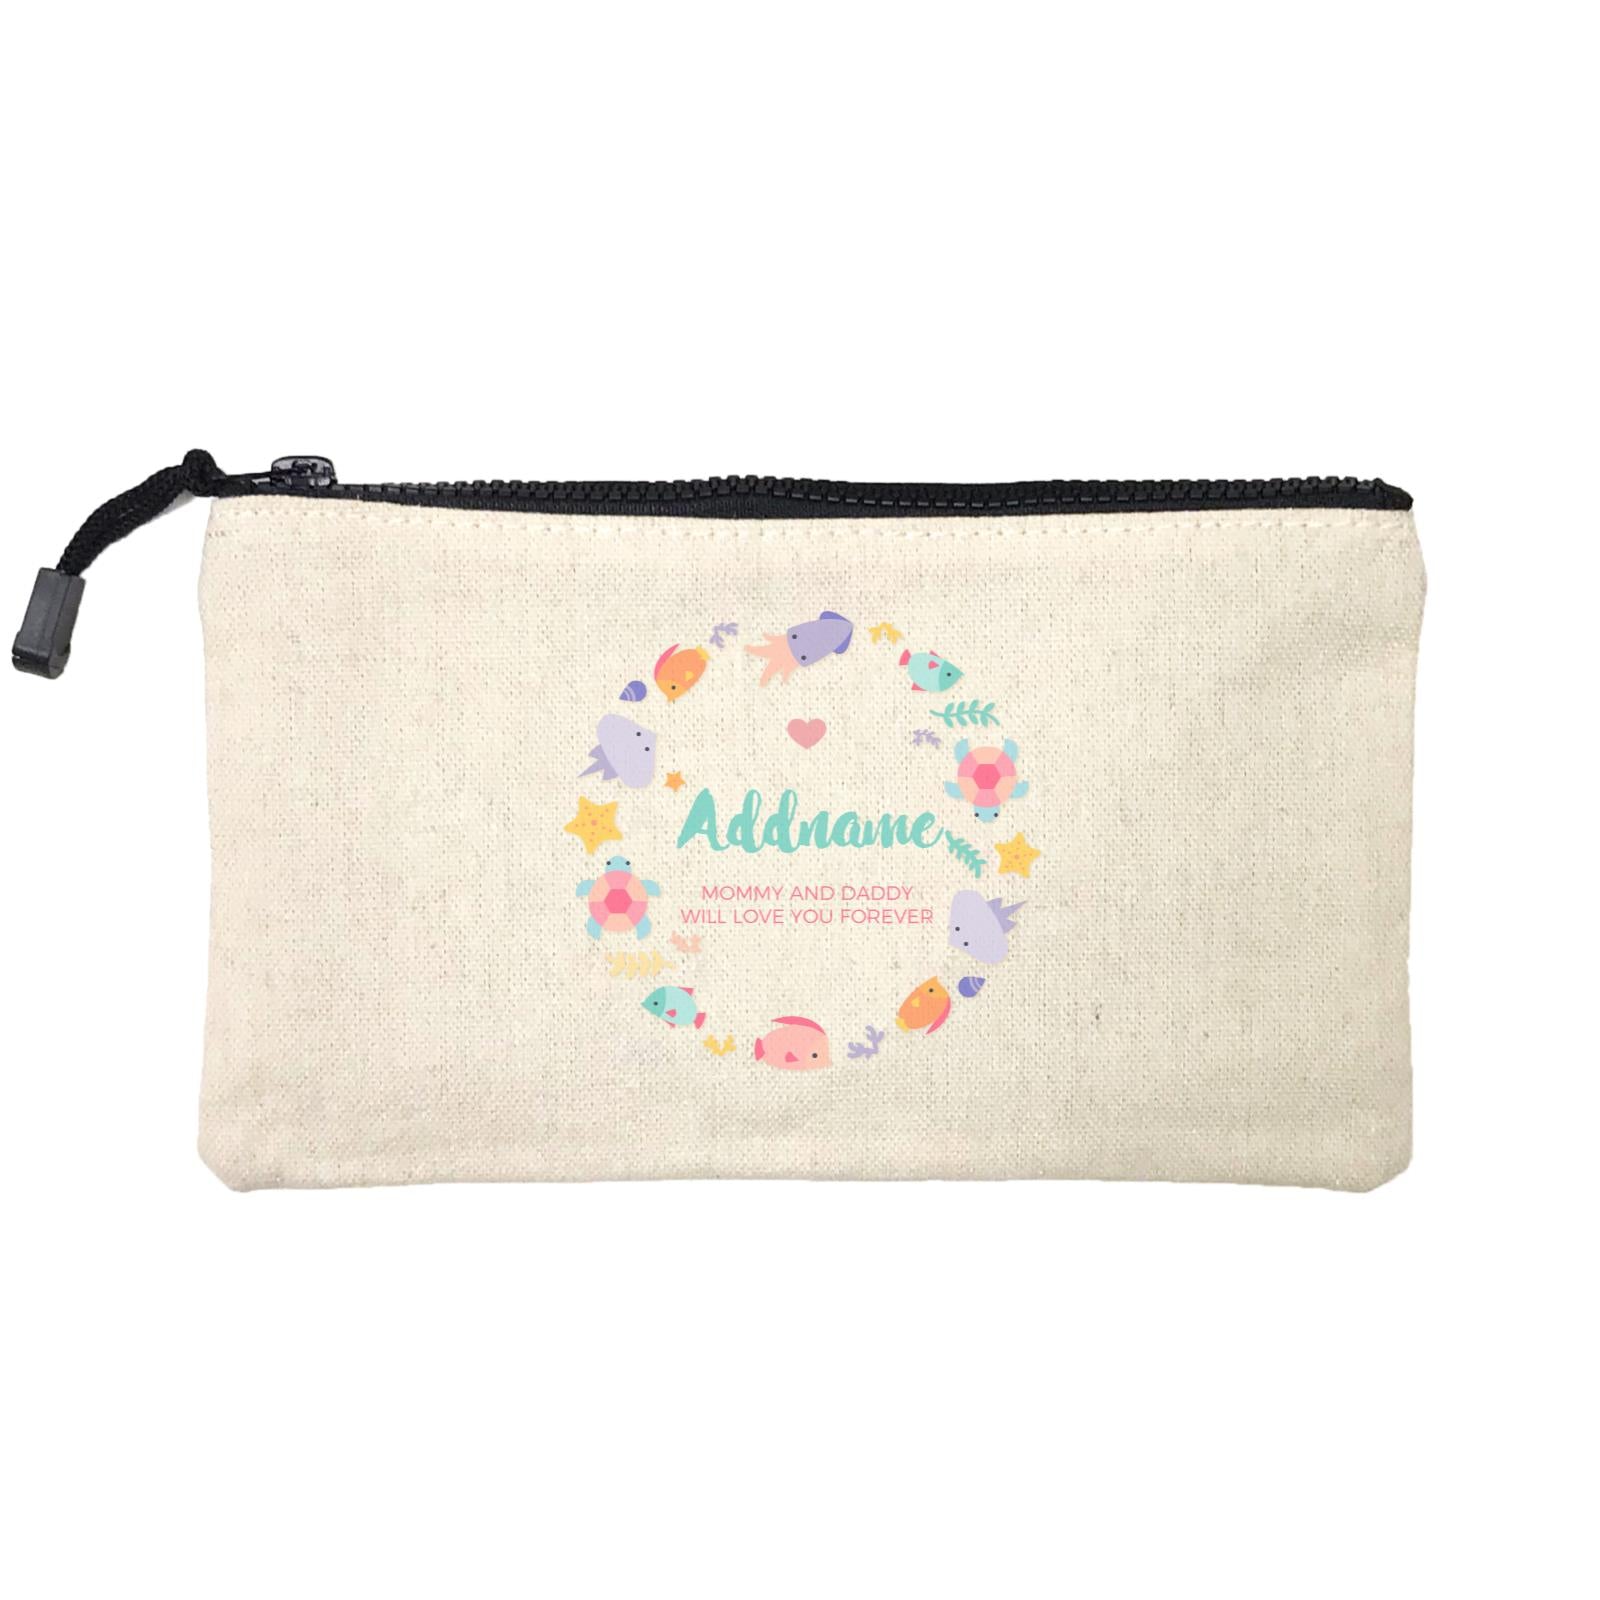 Cute Sea Creatures with Elements Personalizable with Name and Text Stationery Pouch